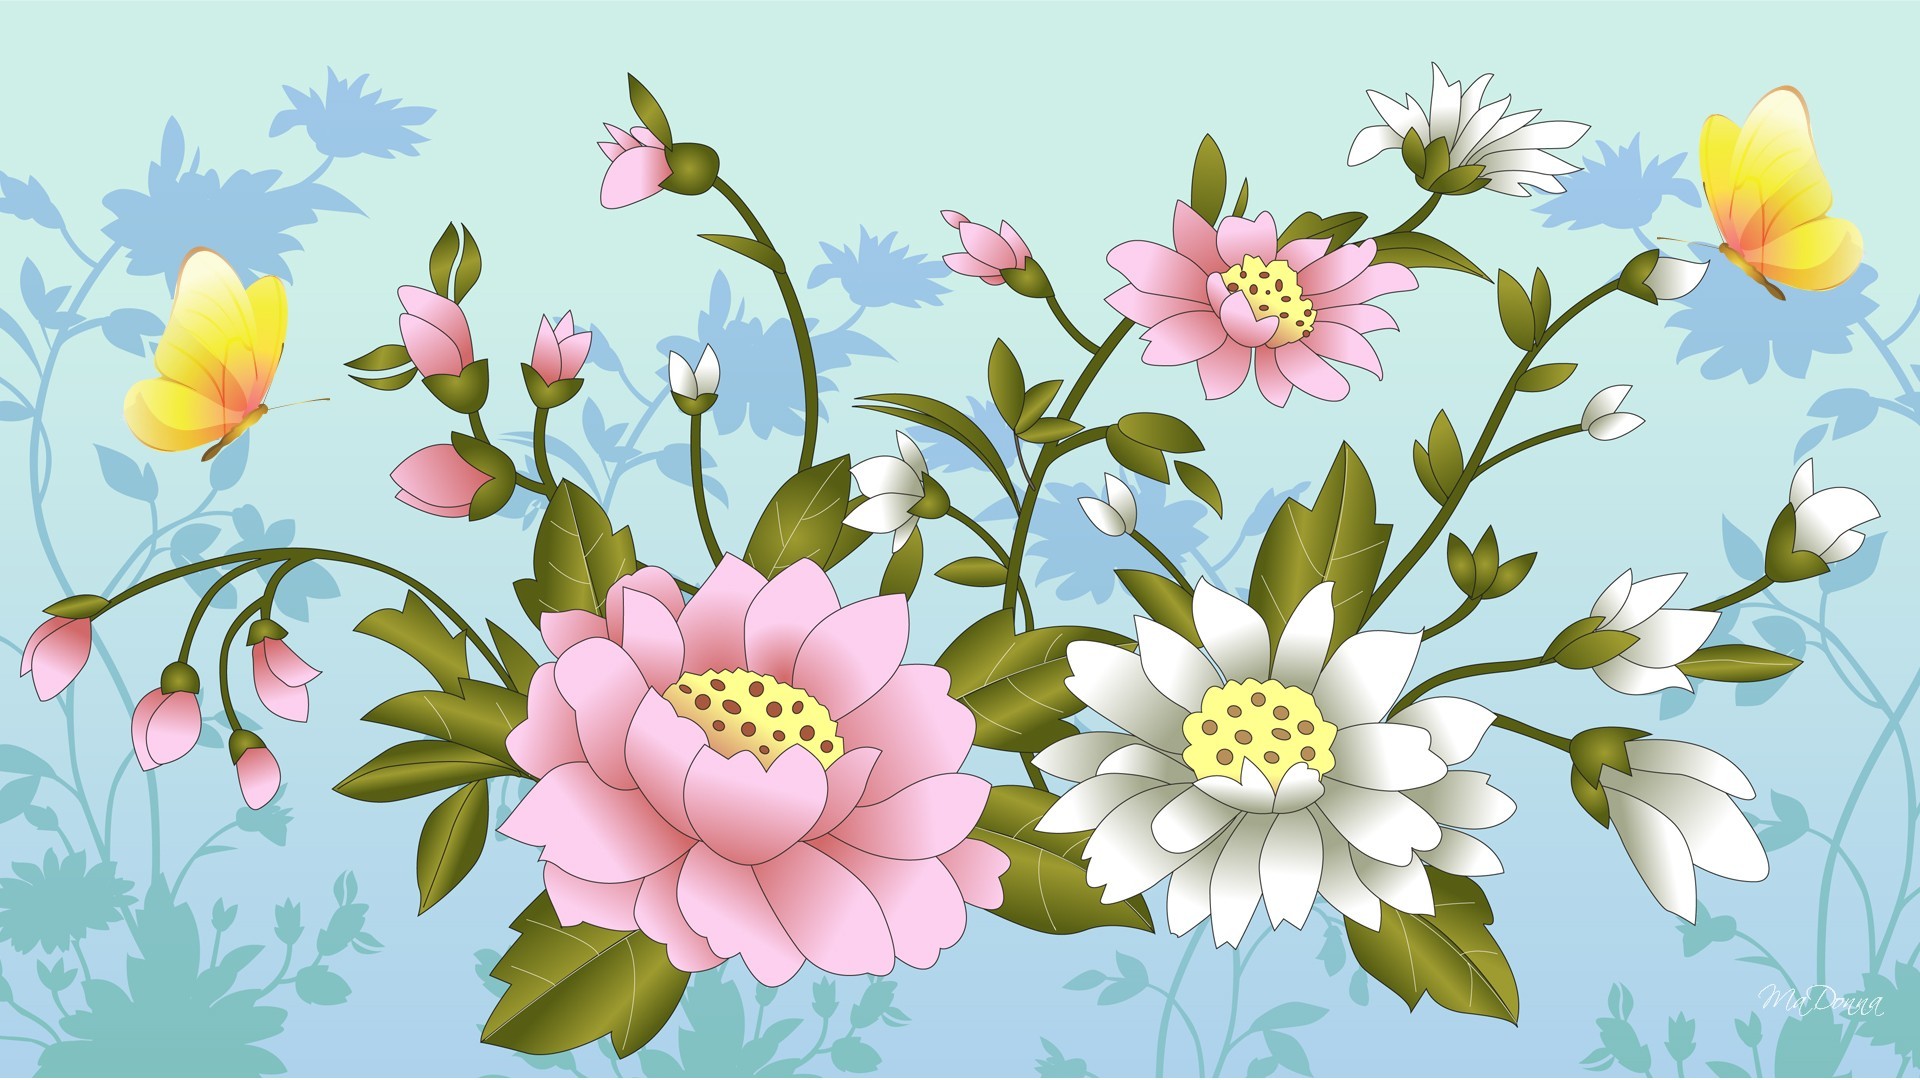 Women's Day Vector Flowers high quality image